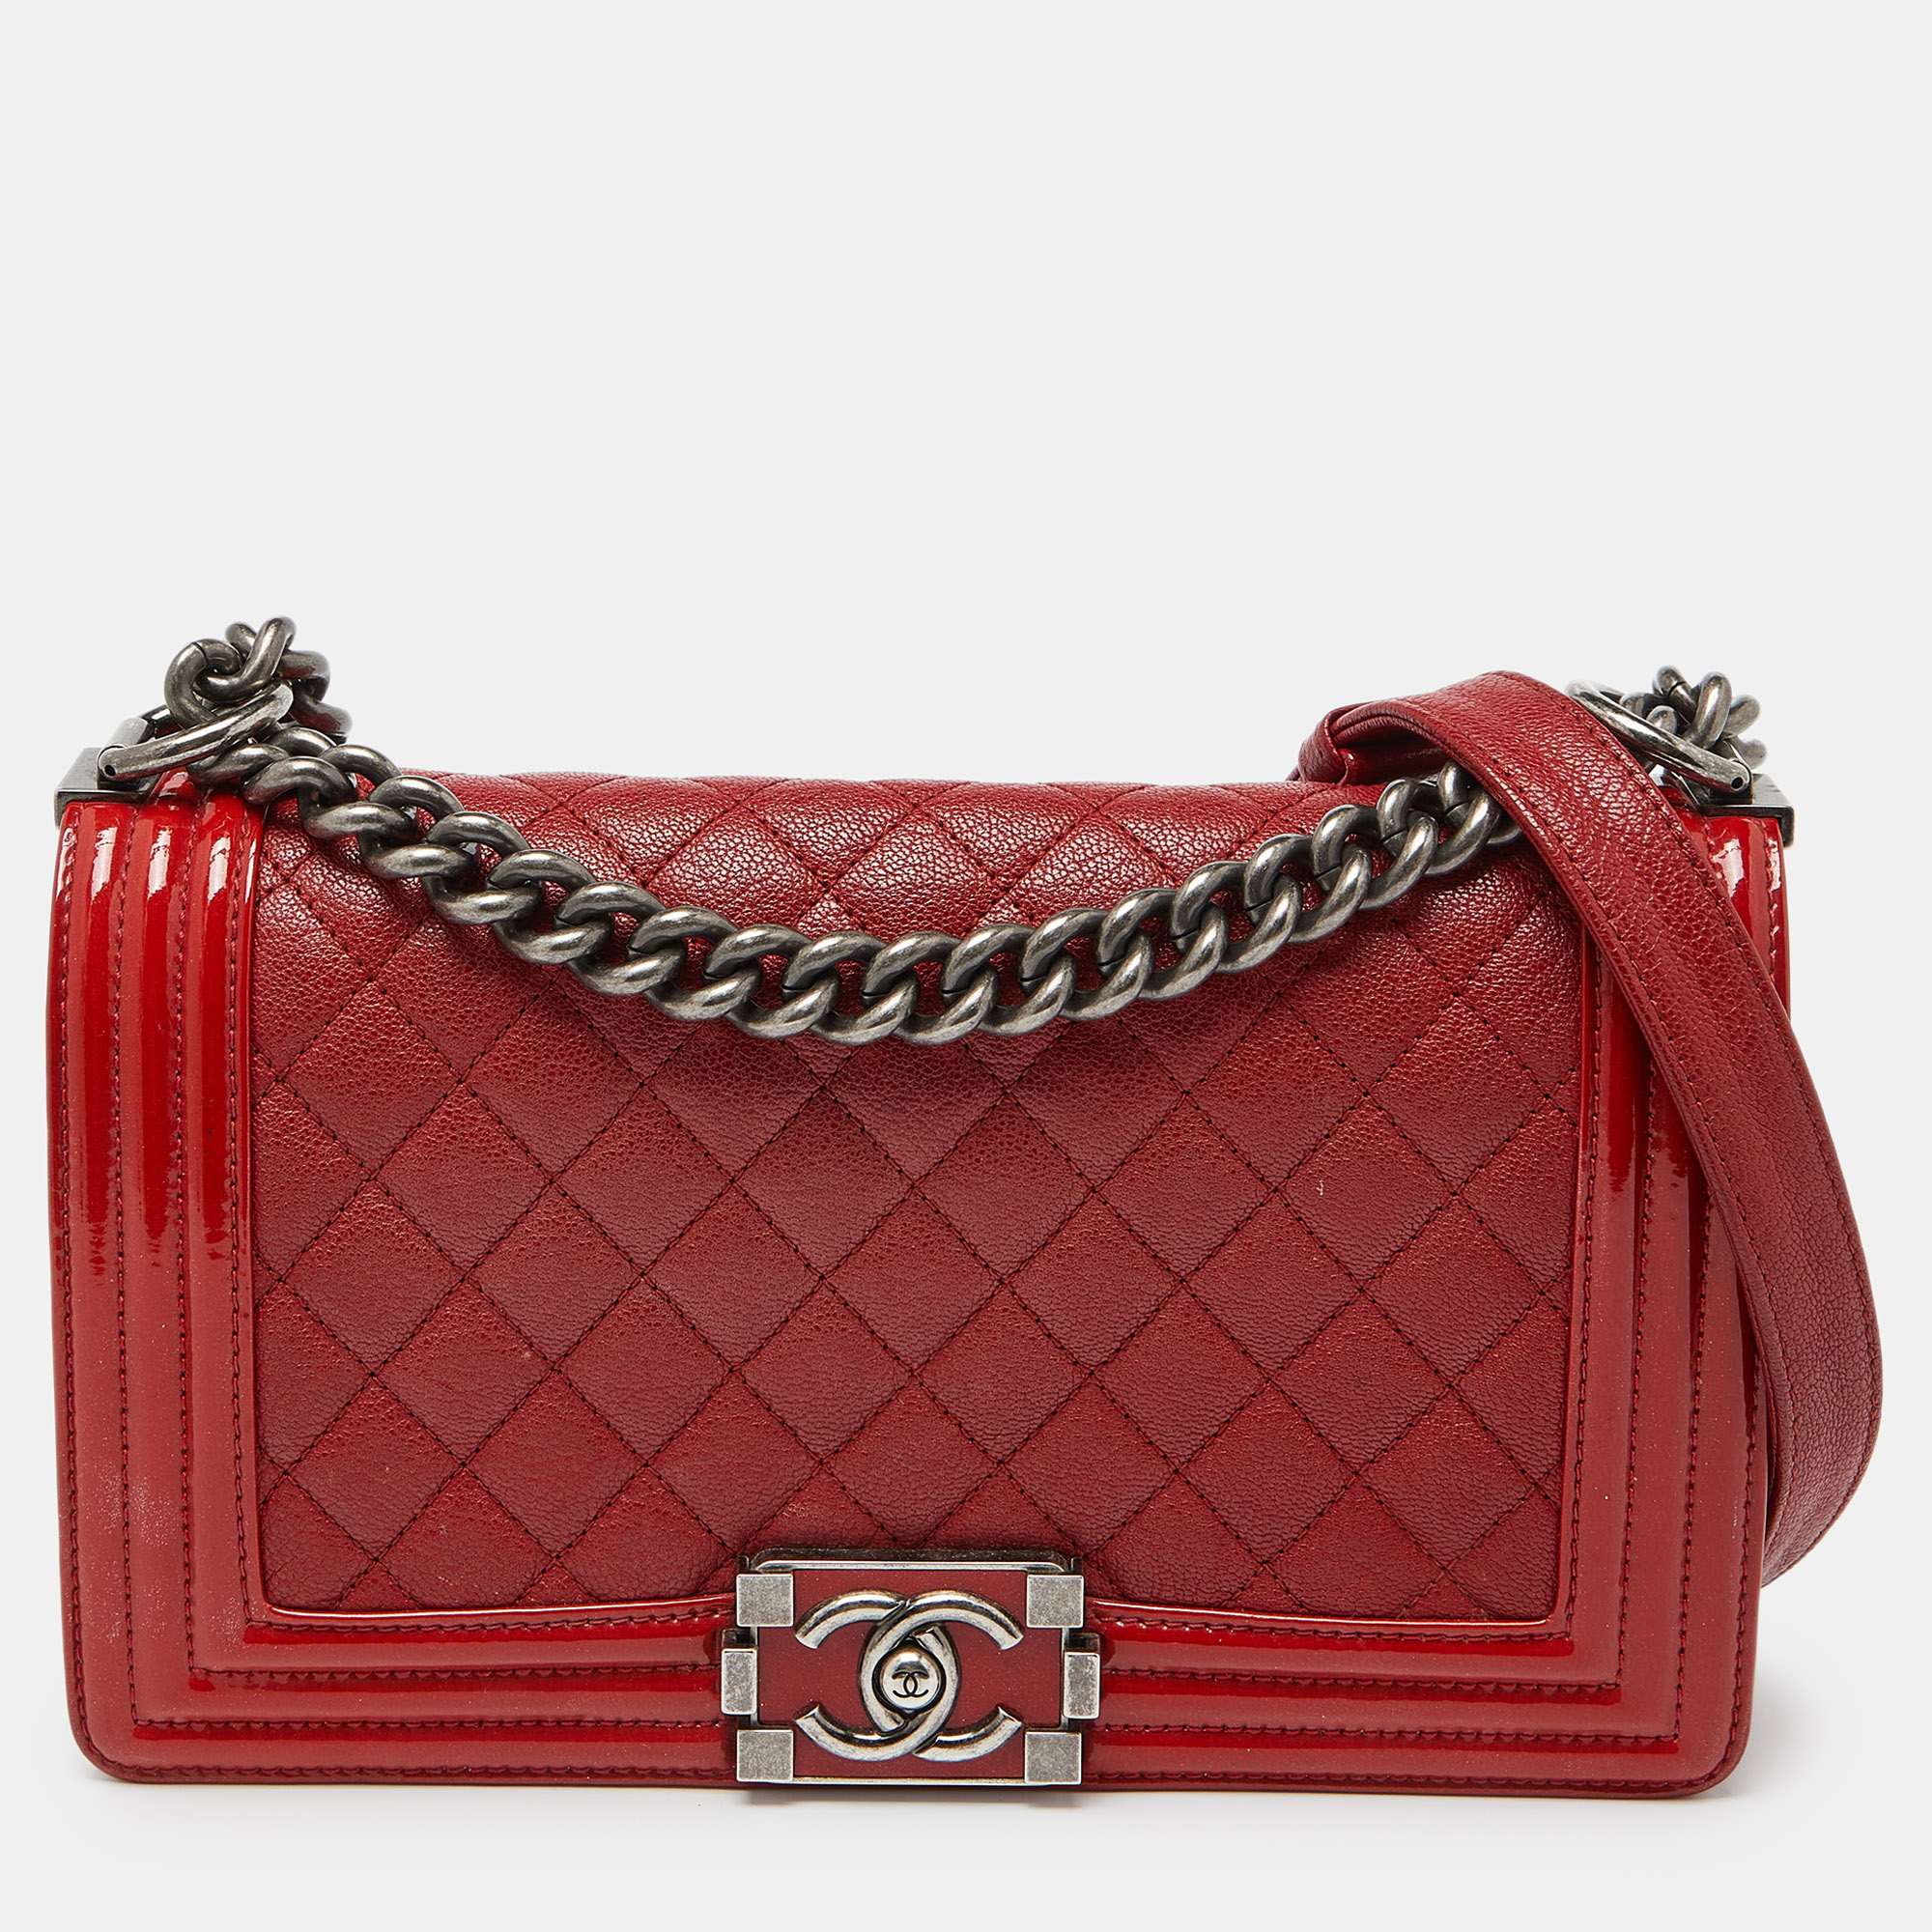 Chanel red quilted leather and patent leather medium boy flap bag